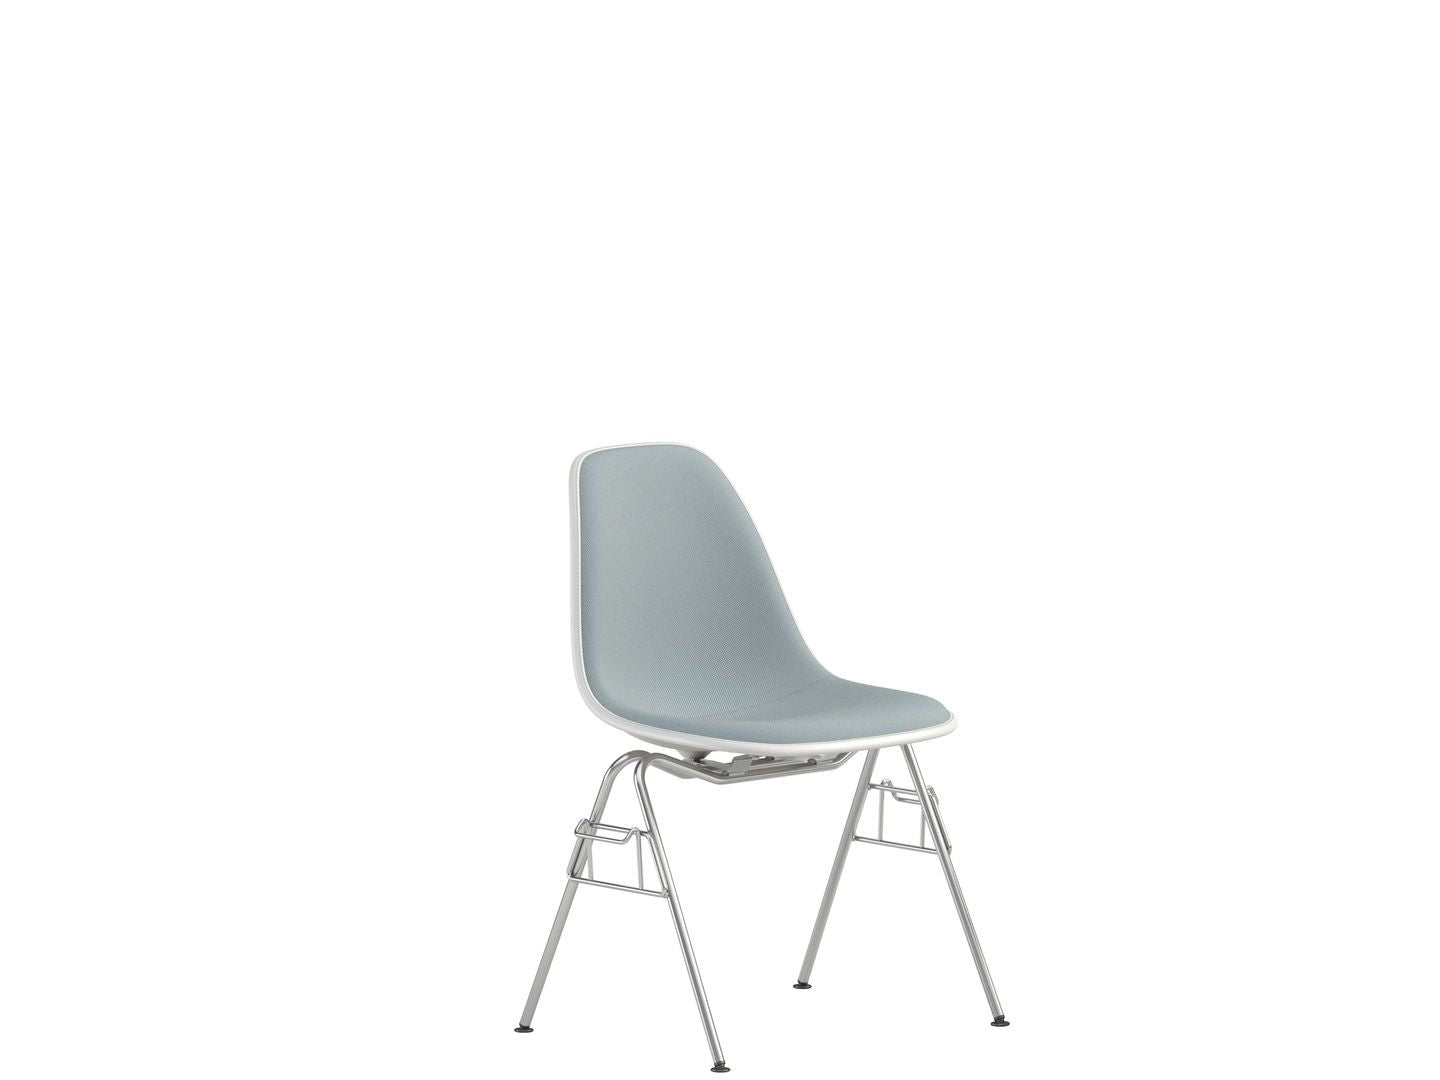 Eames Plastic Side Chair DSS | One52 Furniture 